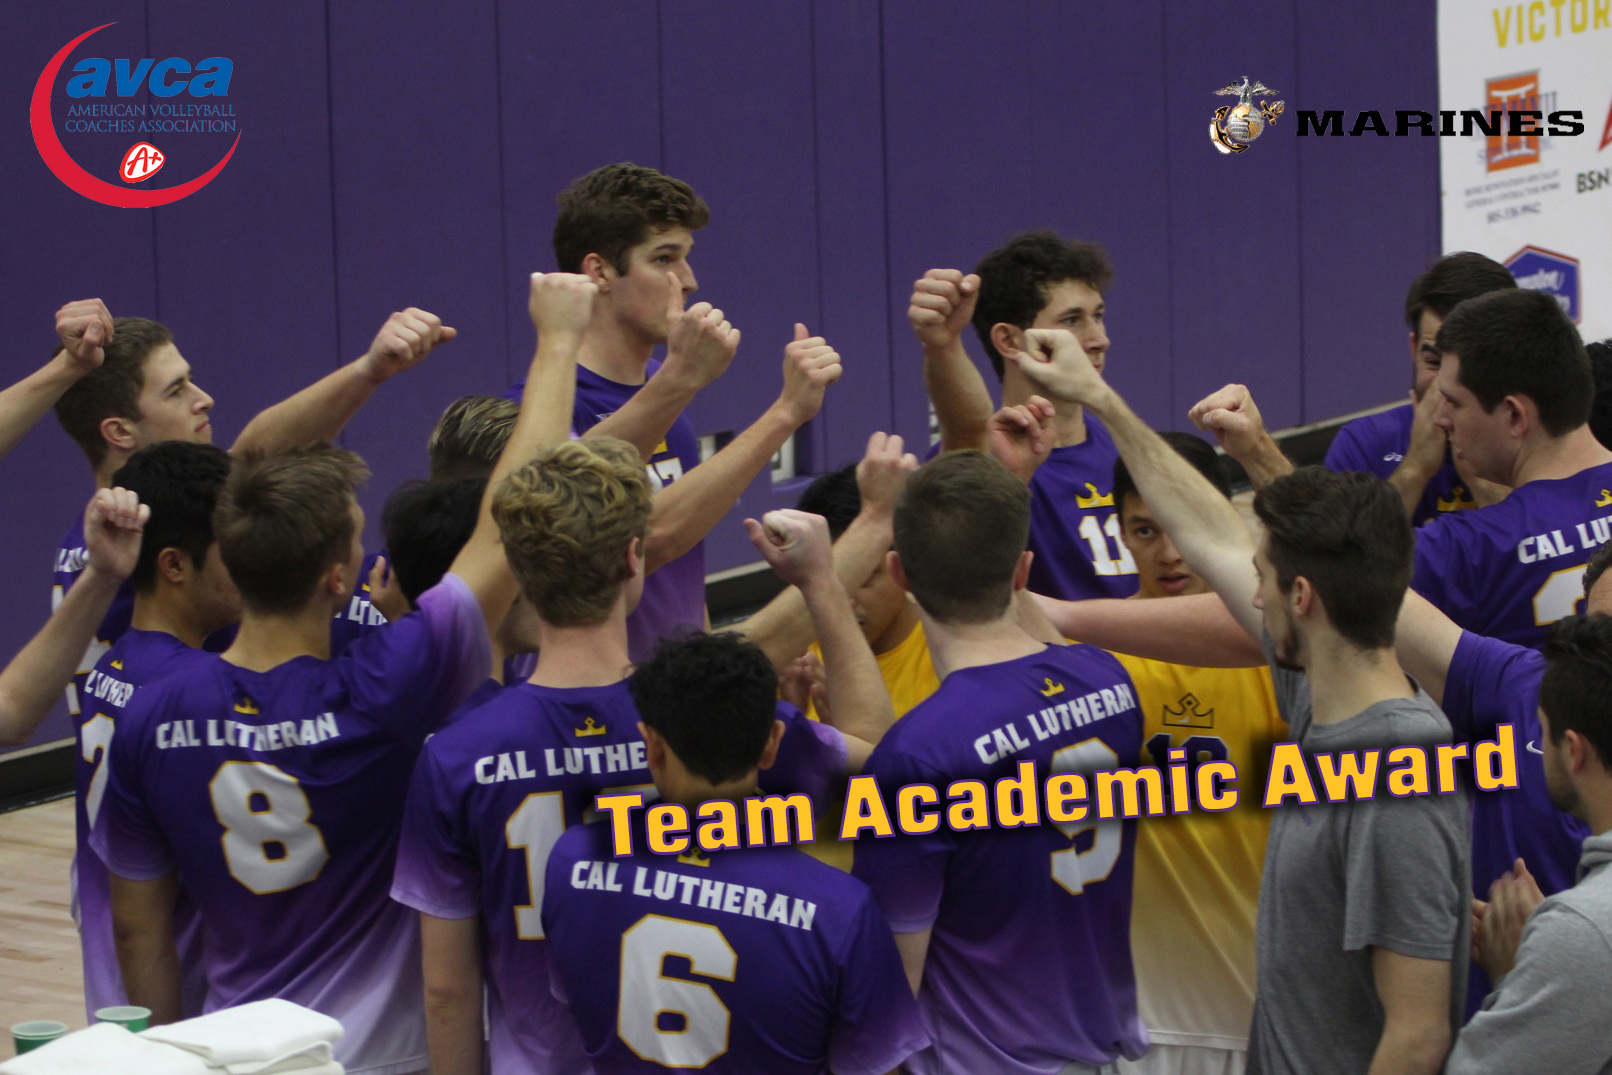 Men’s Volleyball Earns First Team Academic Award in Program History